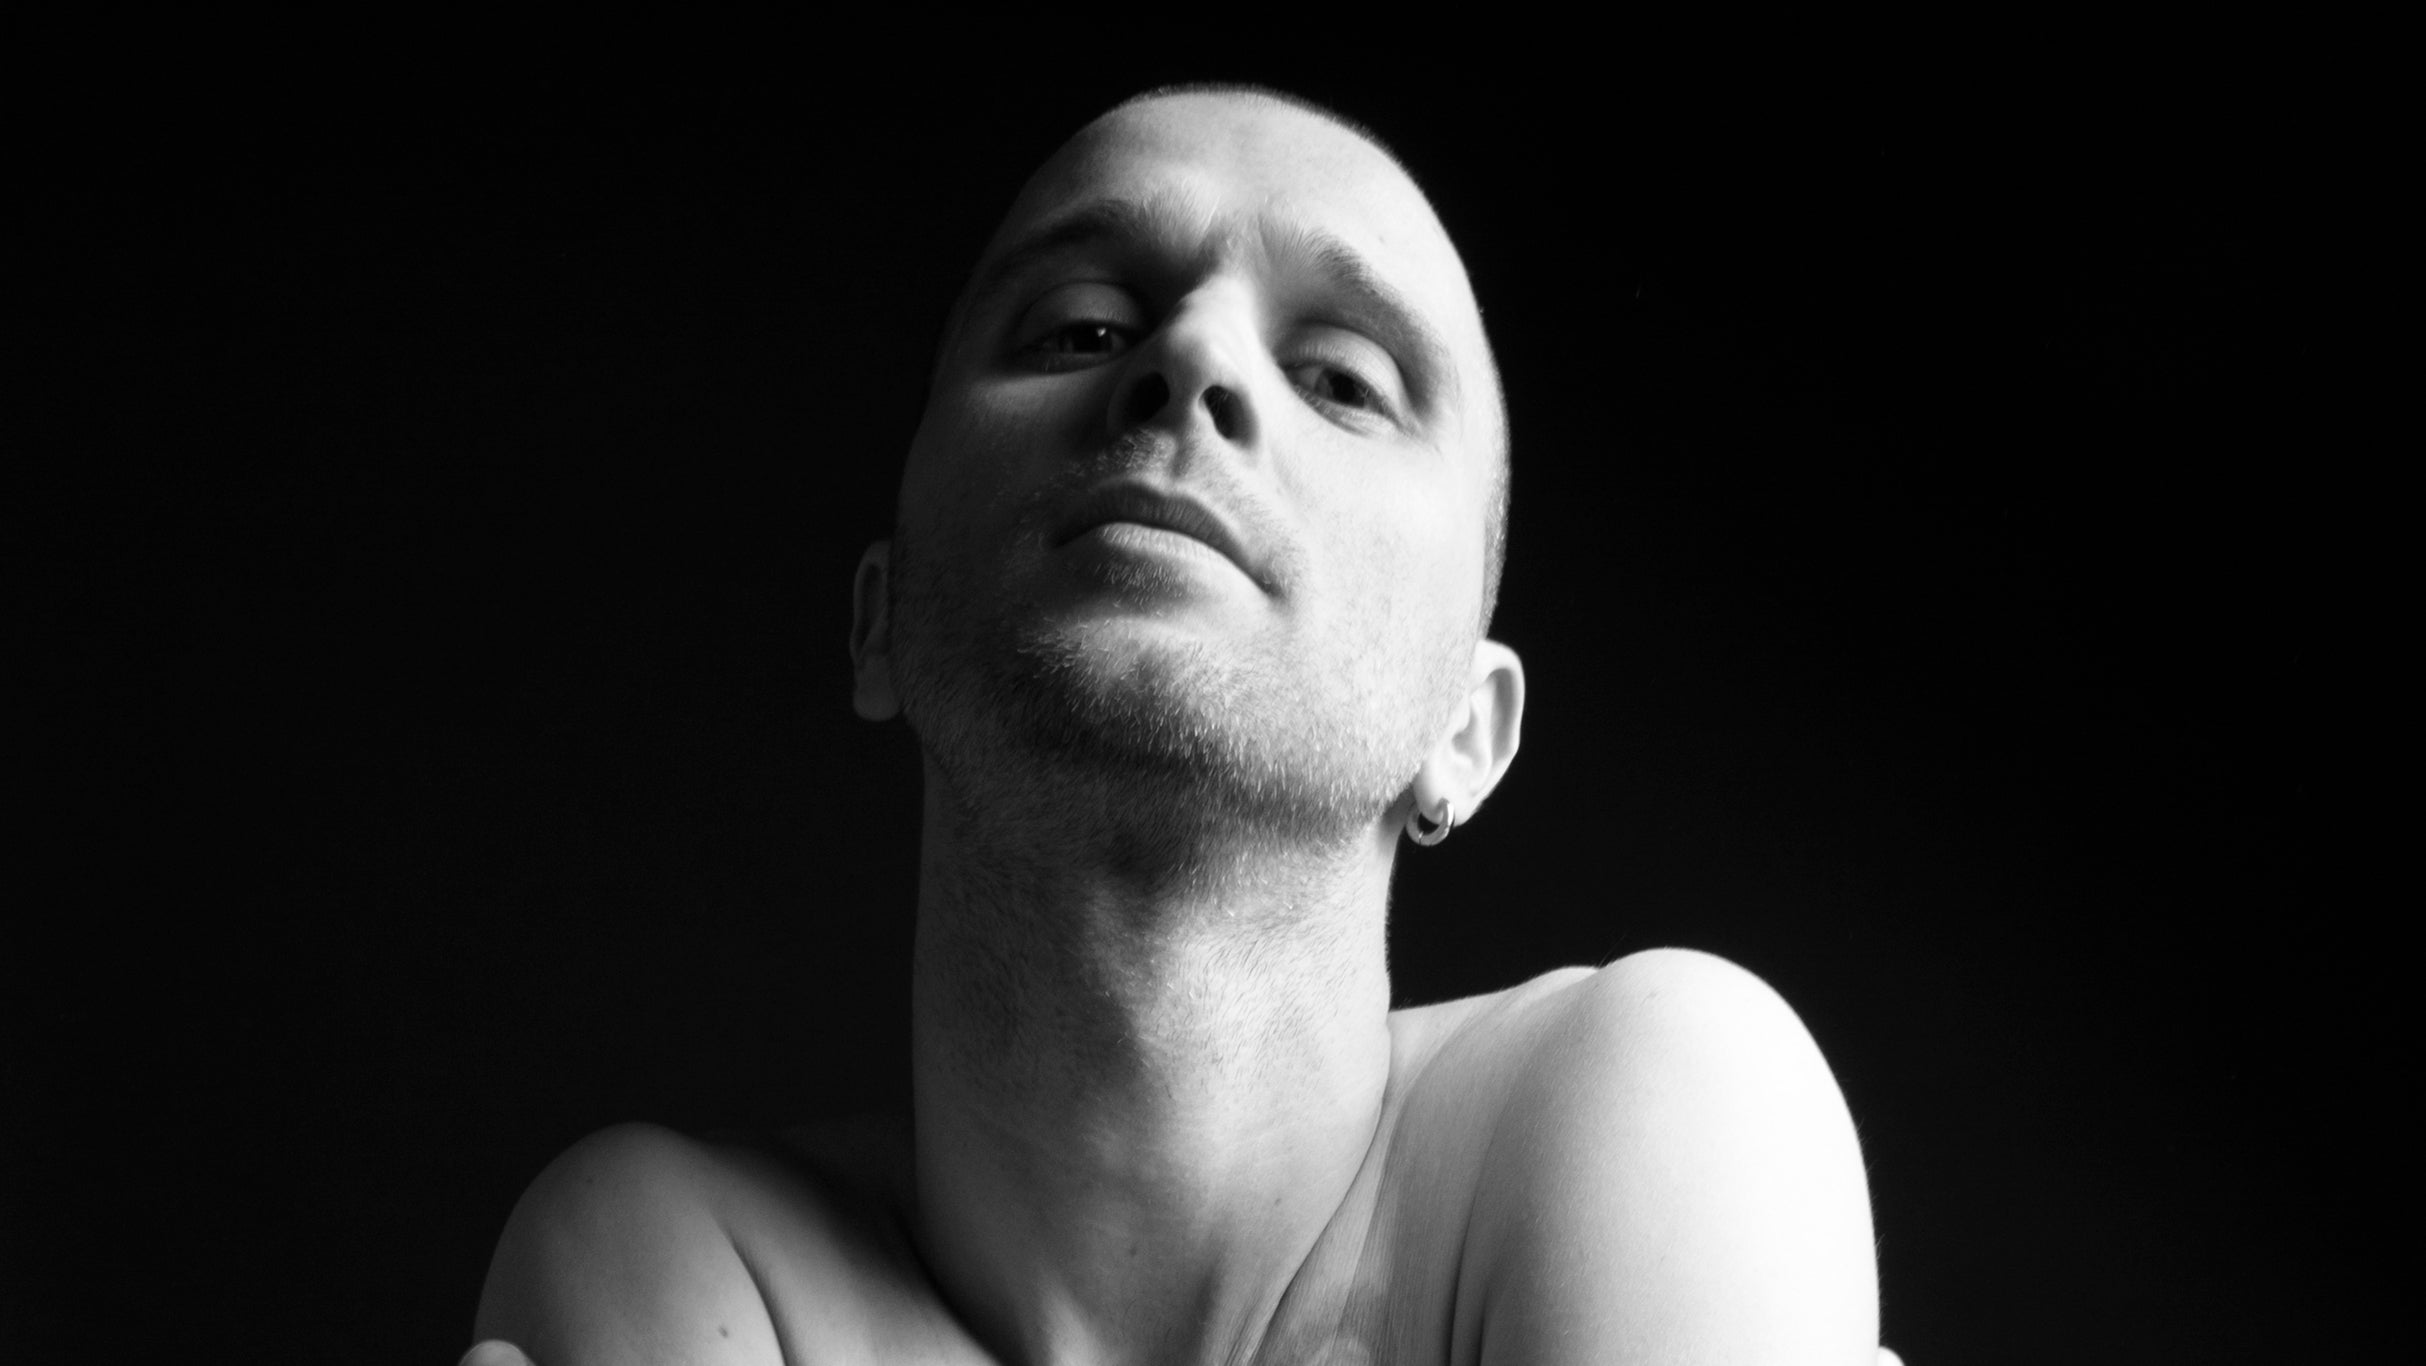 JMSN free presale password for early tickets in Denver